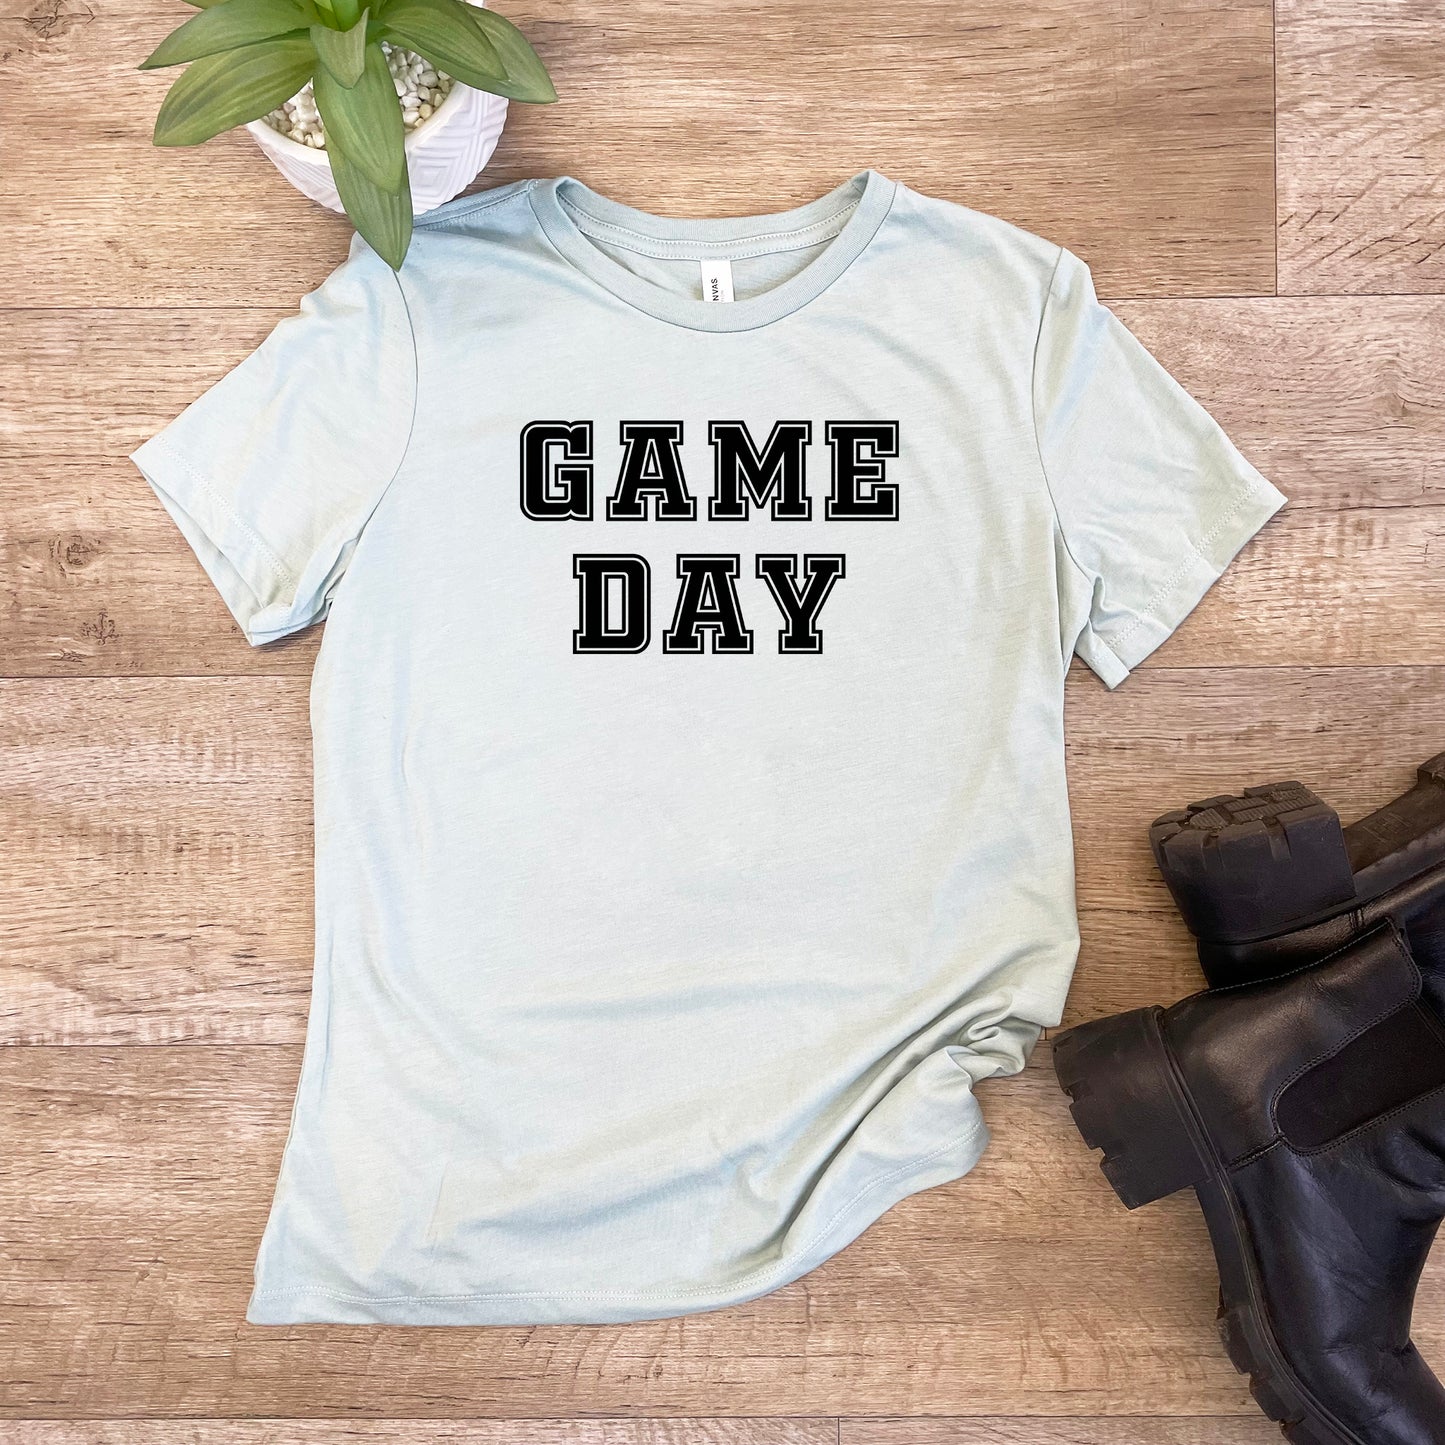 a t - shirt that says game day next to a pair of boots